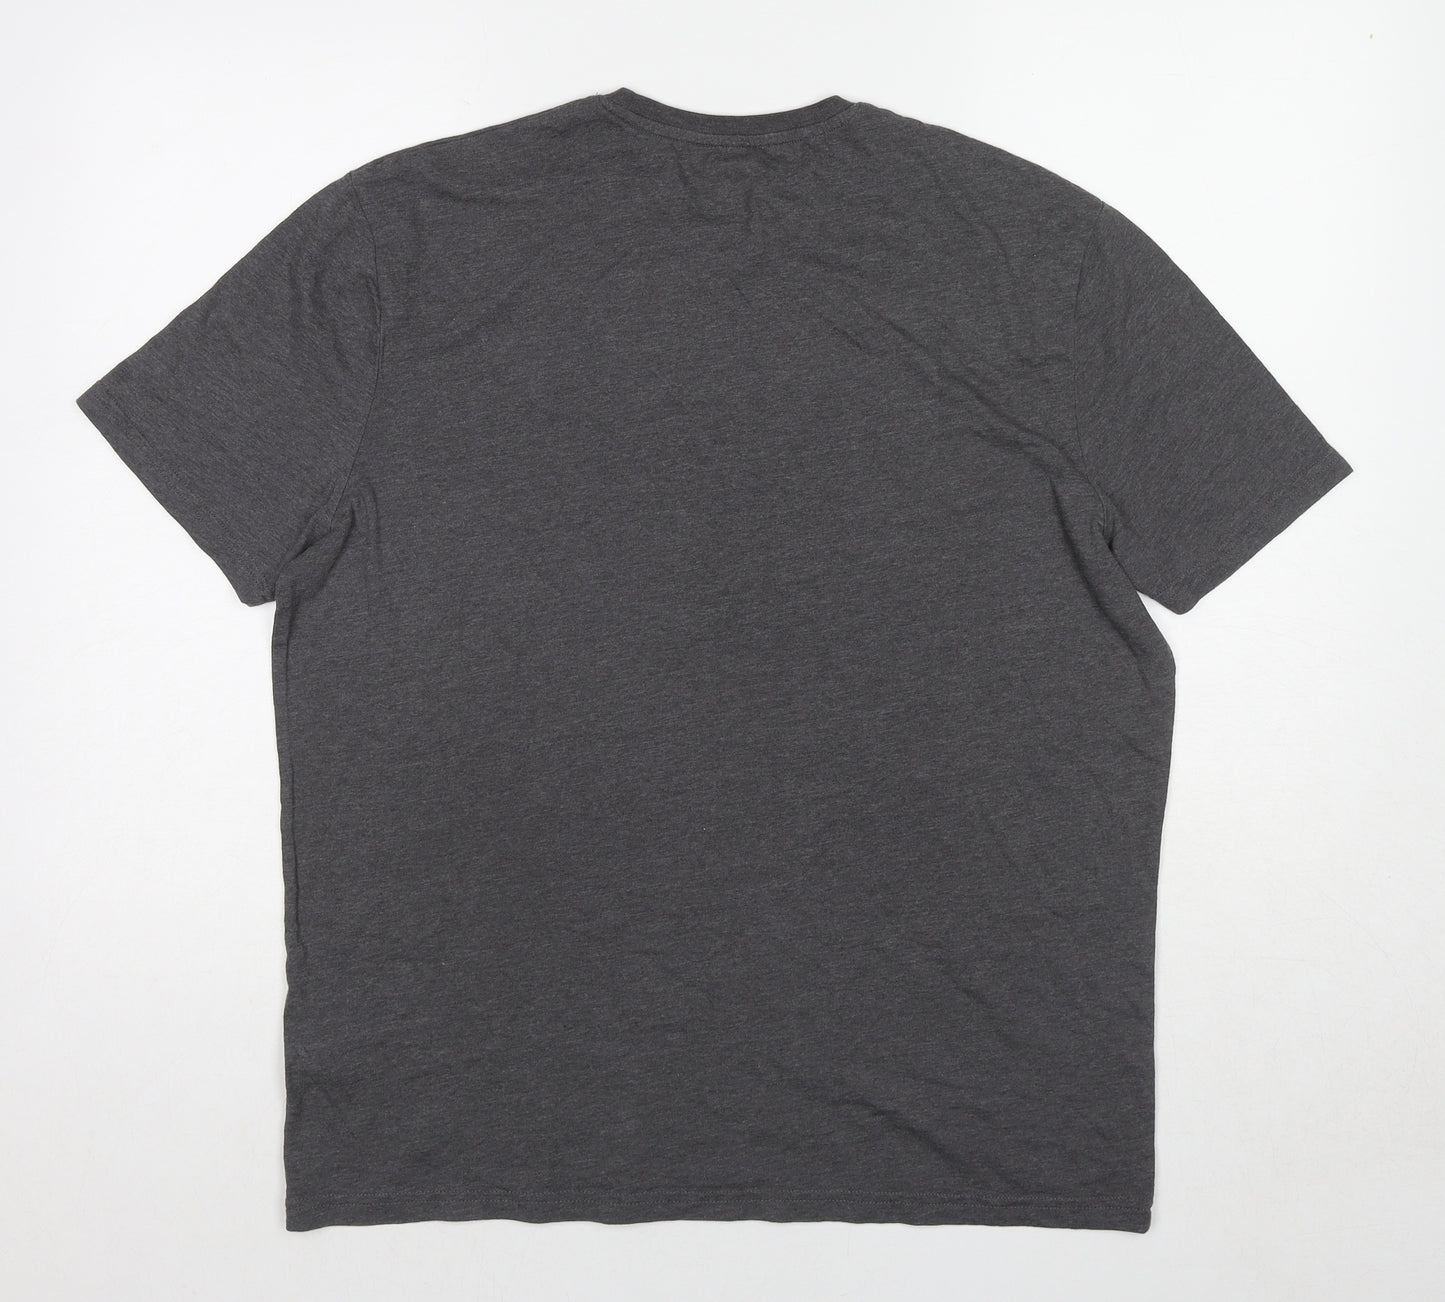 Marks and Spencer Mens Grey Cotton T-Shirt Size L Round Neck